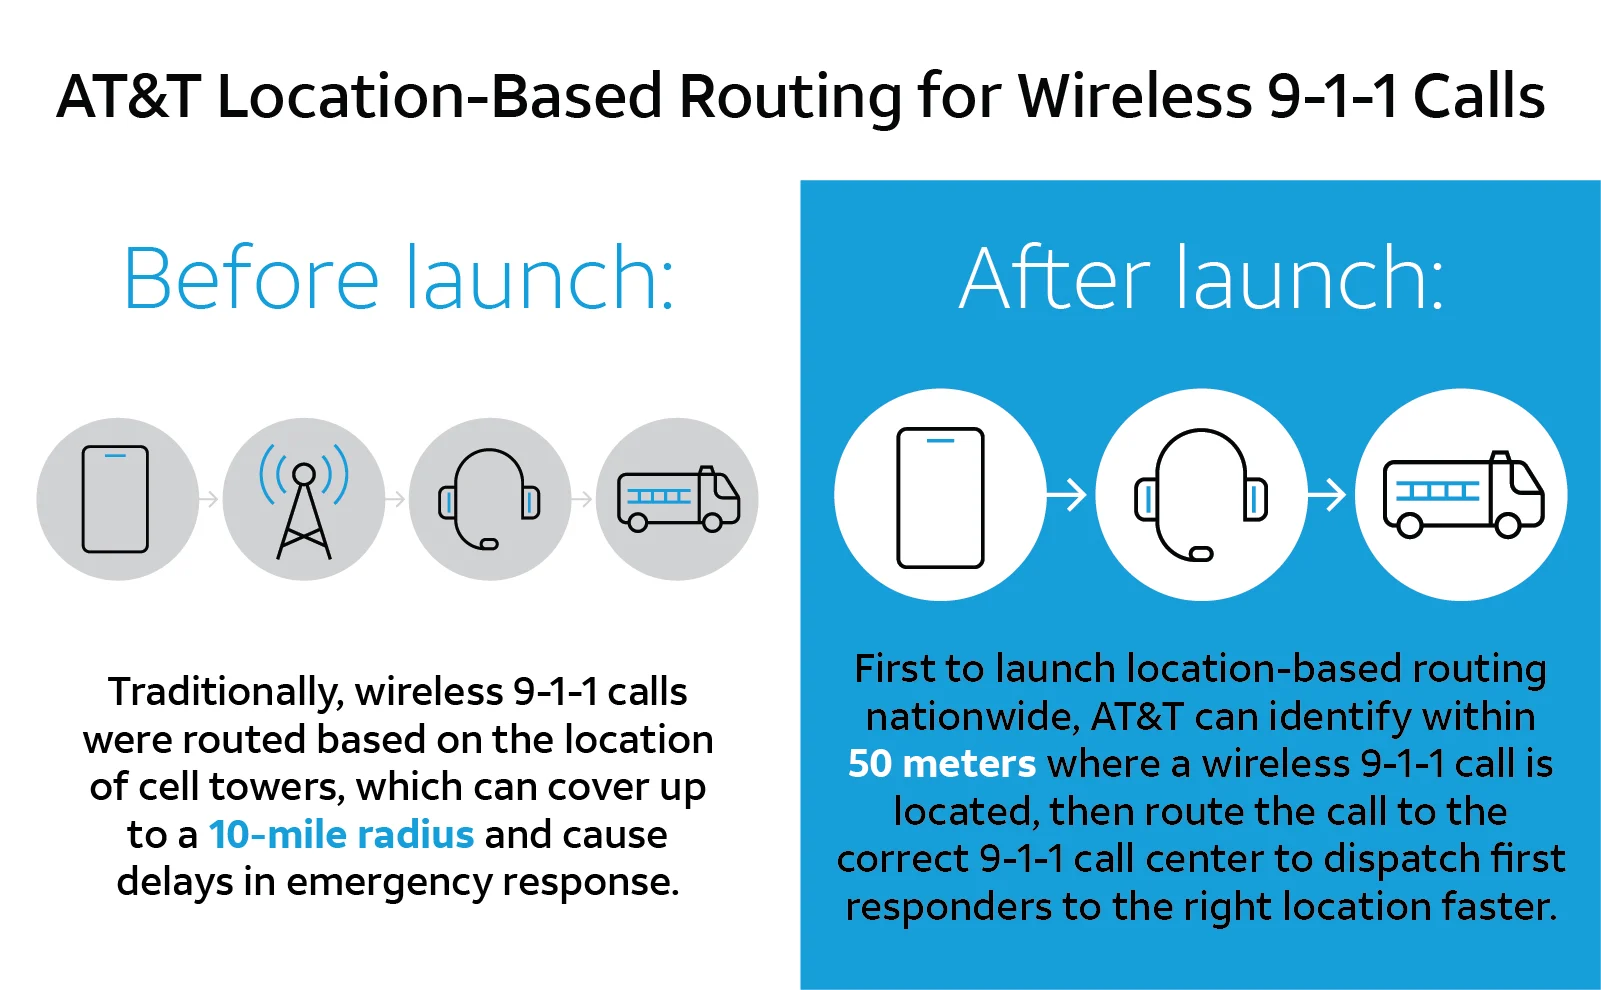 AT&T starts automatically routing wireless 911 calls to the correct call centers